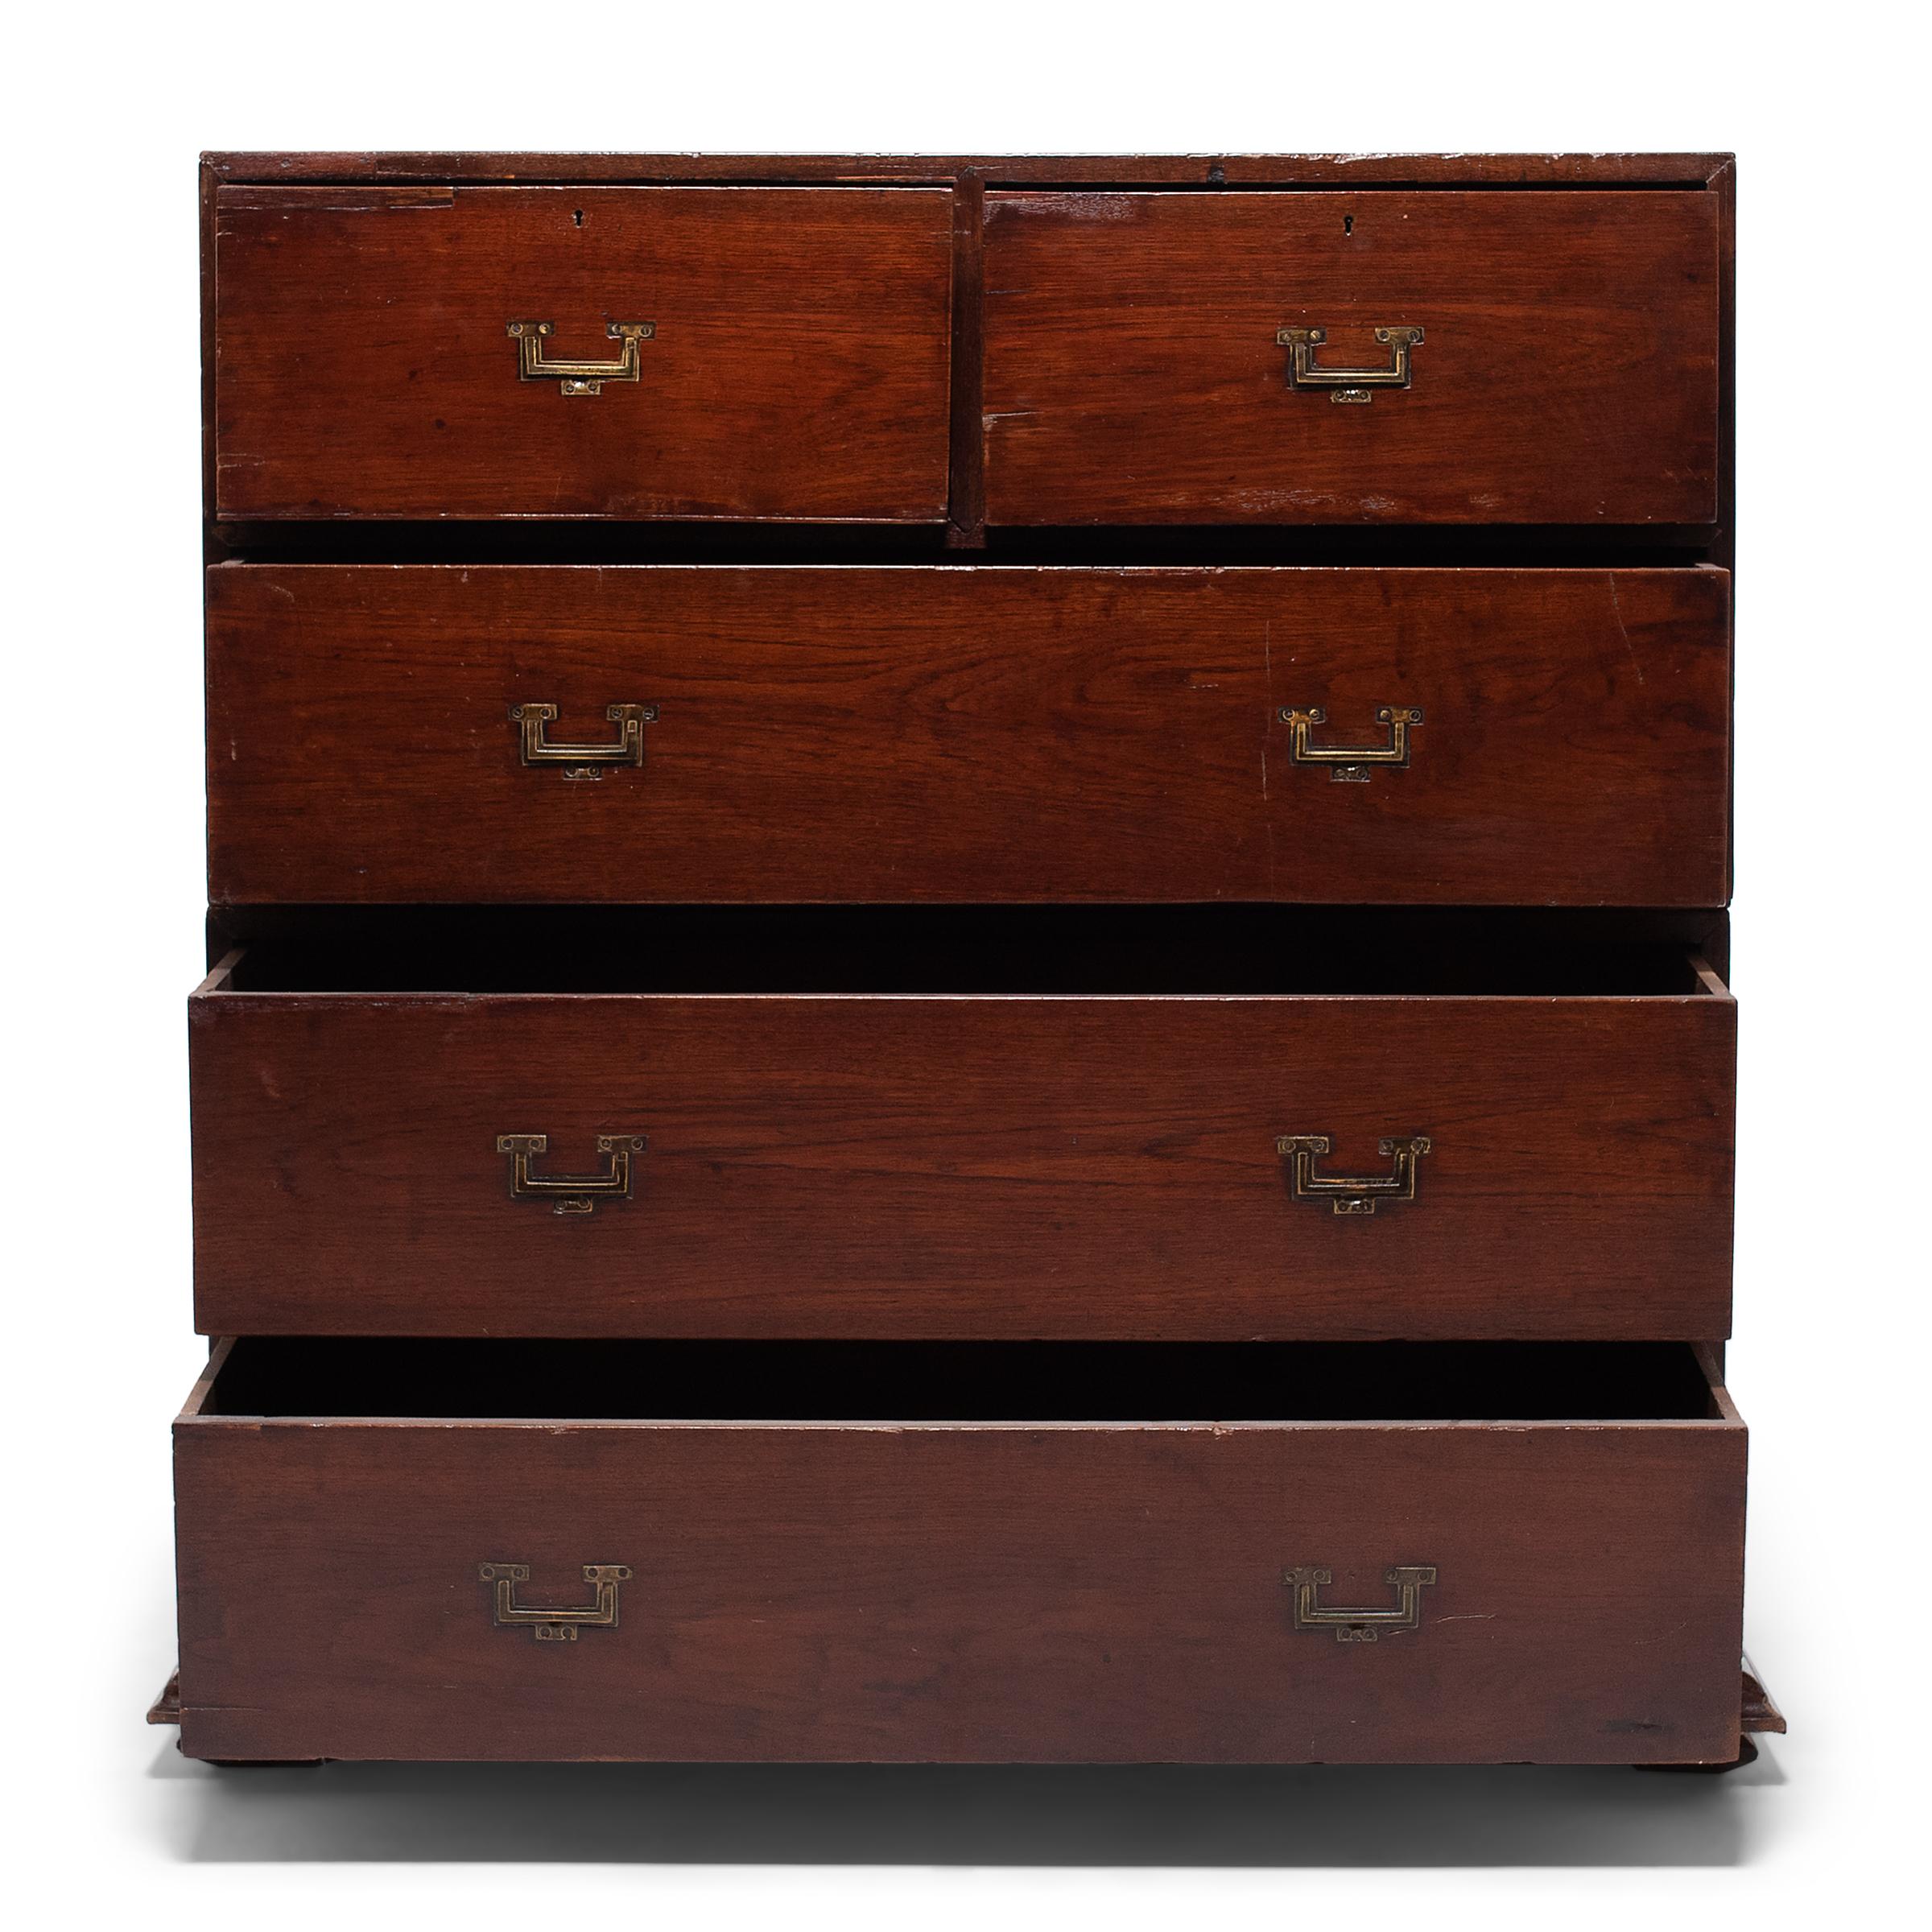 19th Century English Campaign Style Mahogany Stacking Chest of Drawers, c. 1900